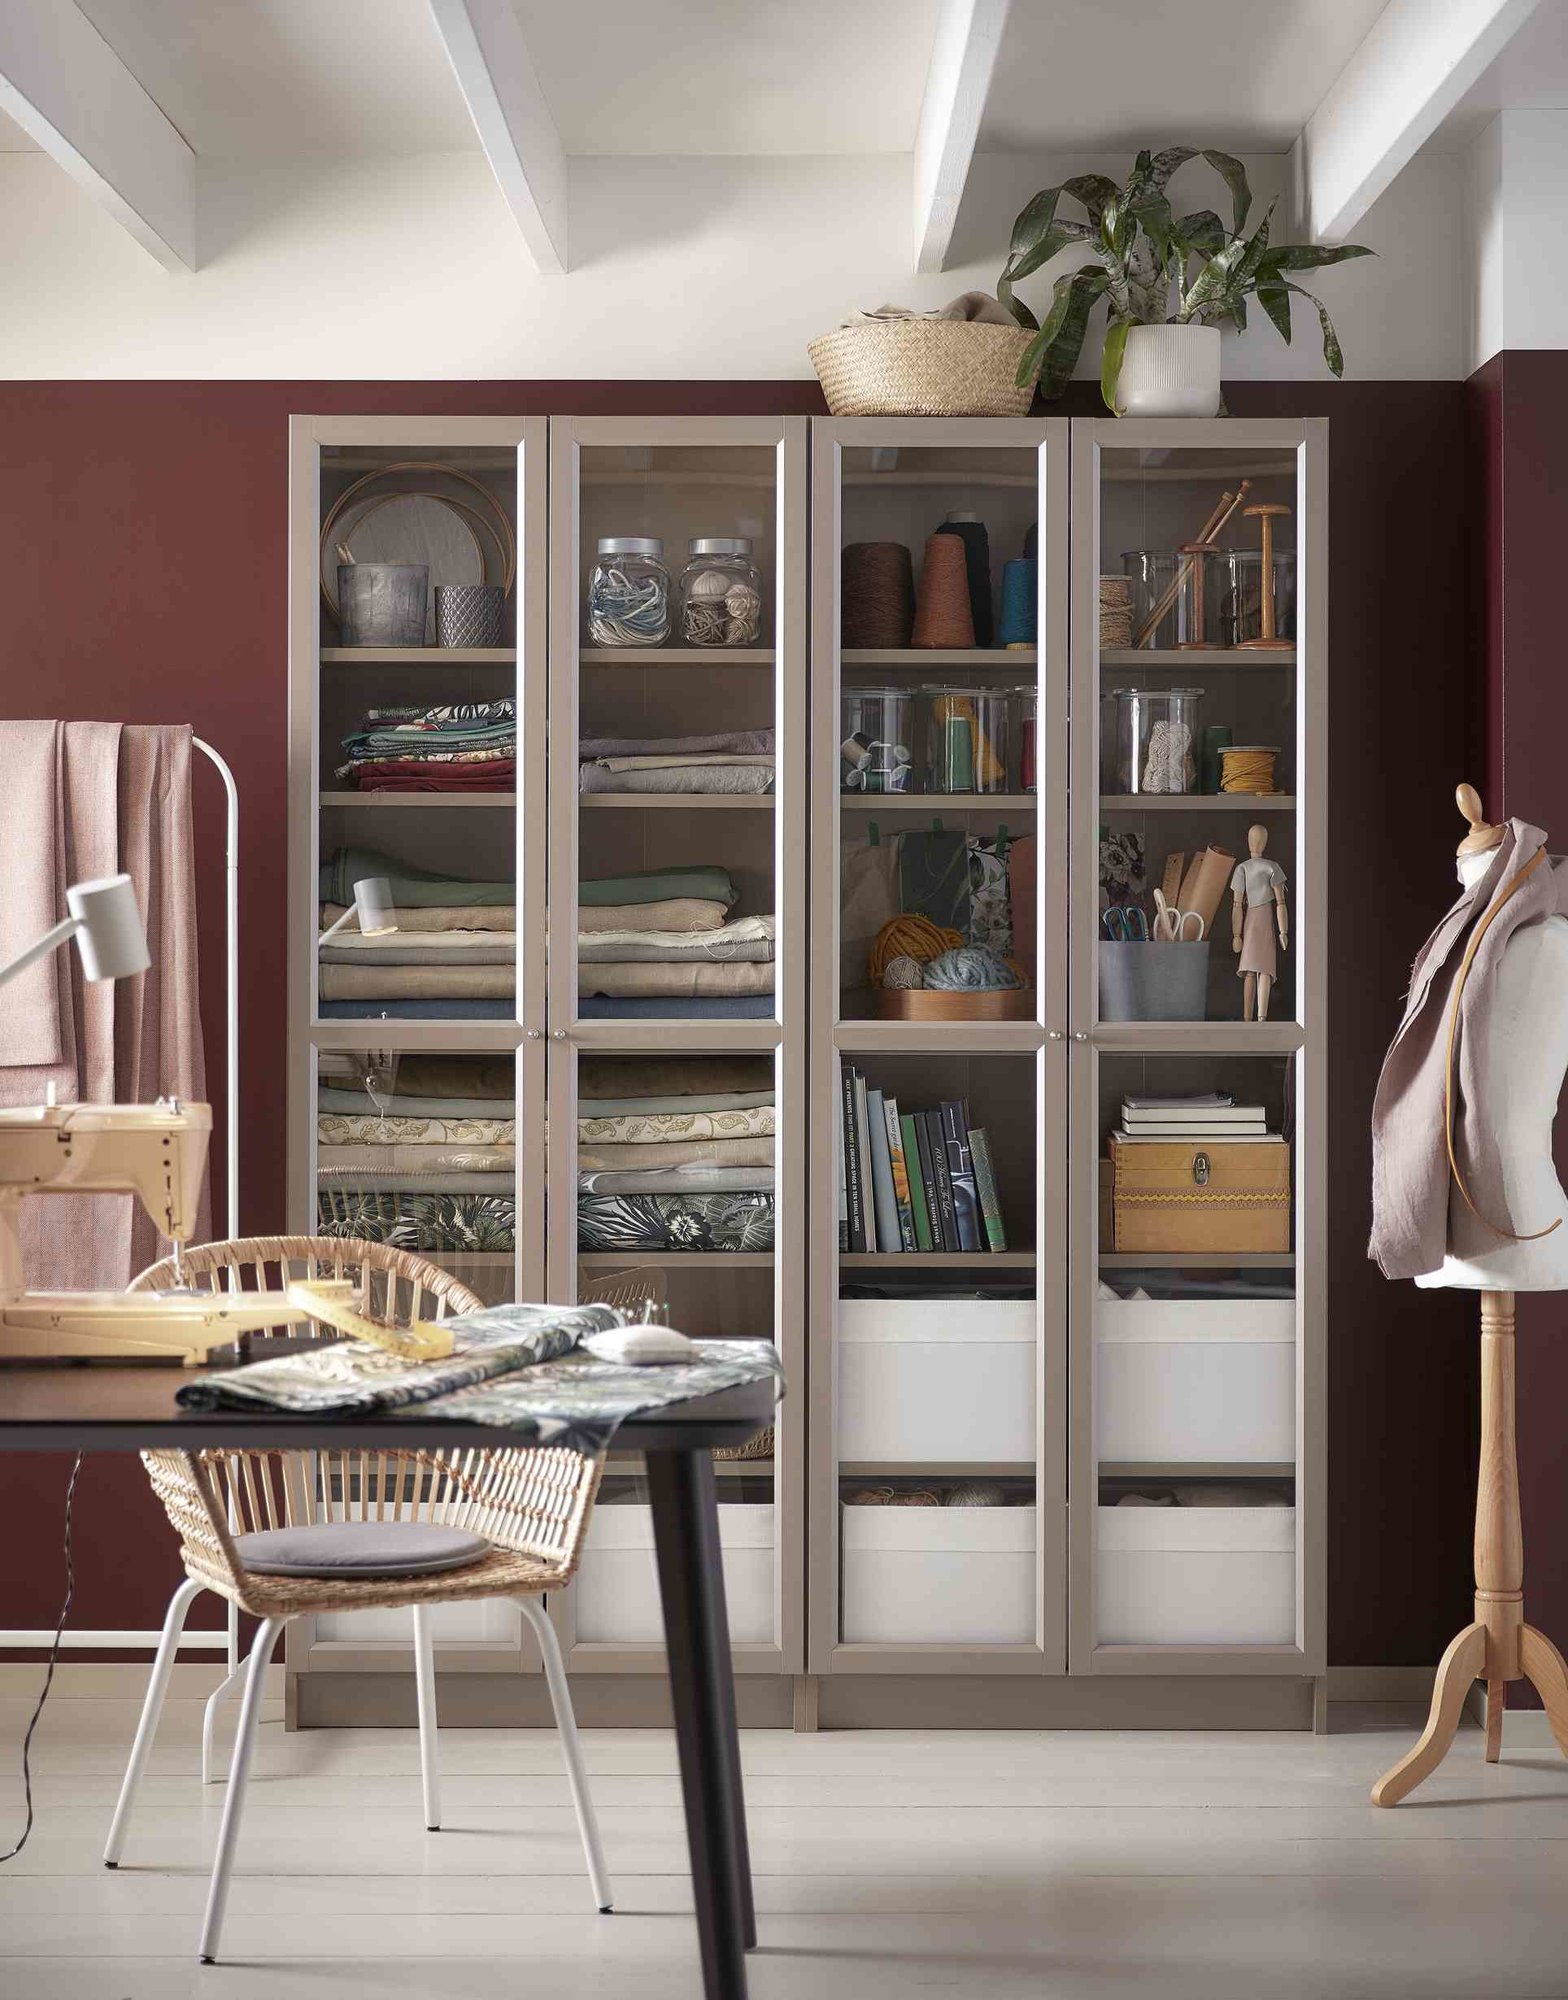 The 2021 IKEA Catalog Is Here—These Are the 7 Best Trends We Saw